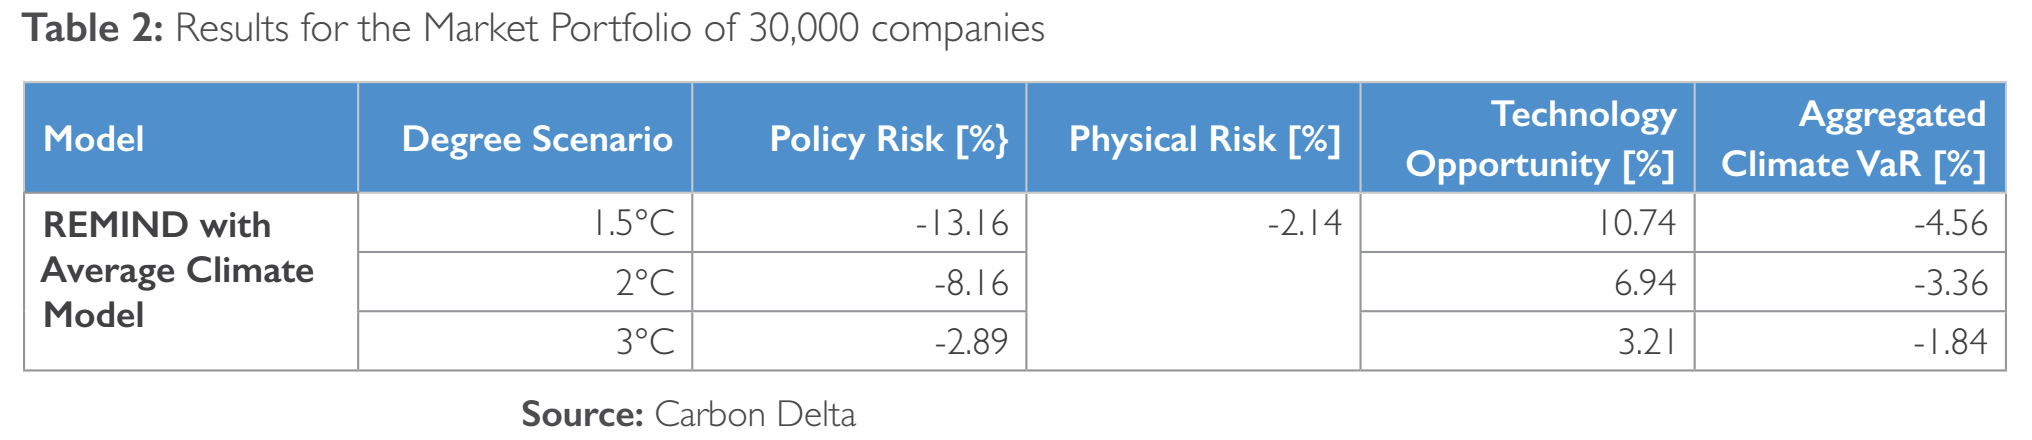 Table of the financial impact to a global portfolio of 30 000 companies under different global warming scenarios showing an aggregate climate value at risk of -1.84 to -4.56%